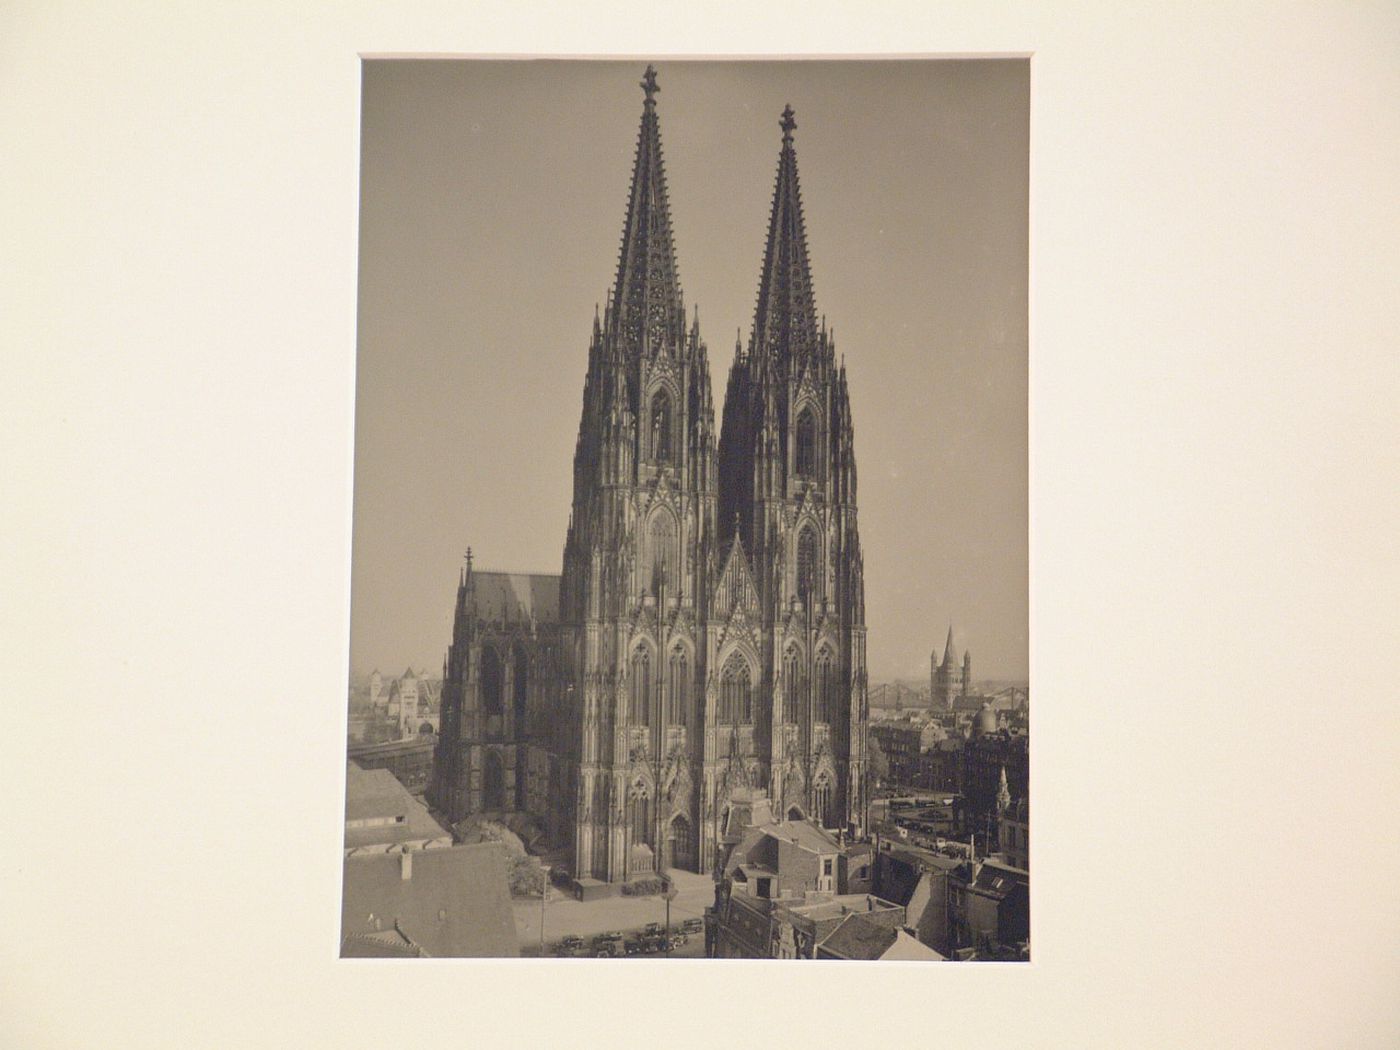 Façade, portals and towers of cathedral, Cologne, Germany